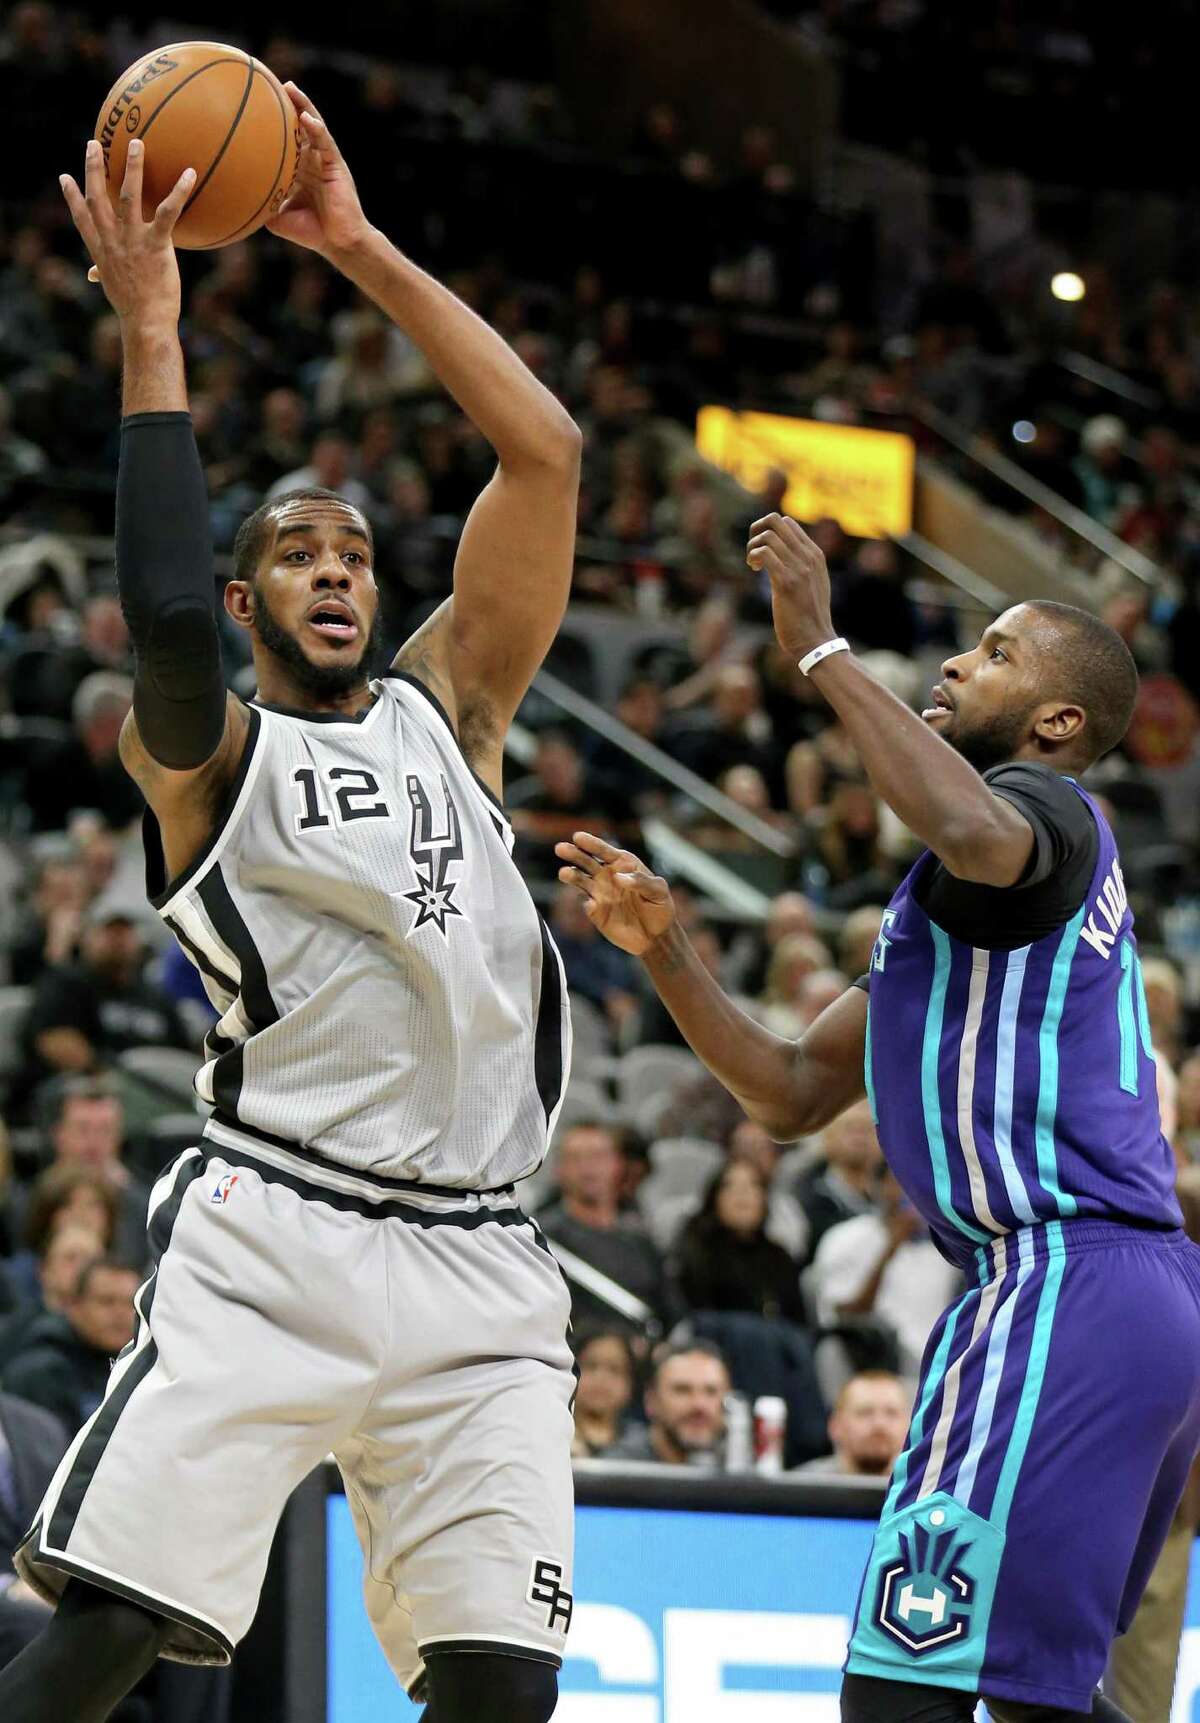 San Antonio Spurs' LaMarcus Aldridge looks to pass around Charlotte Hornets' Michael Kidd-Gilchrist during first half action Saturday Jan. 7, 2017 at the AT&T Center.